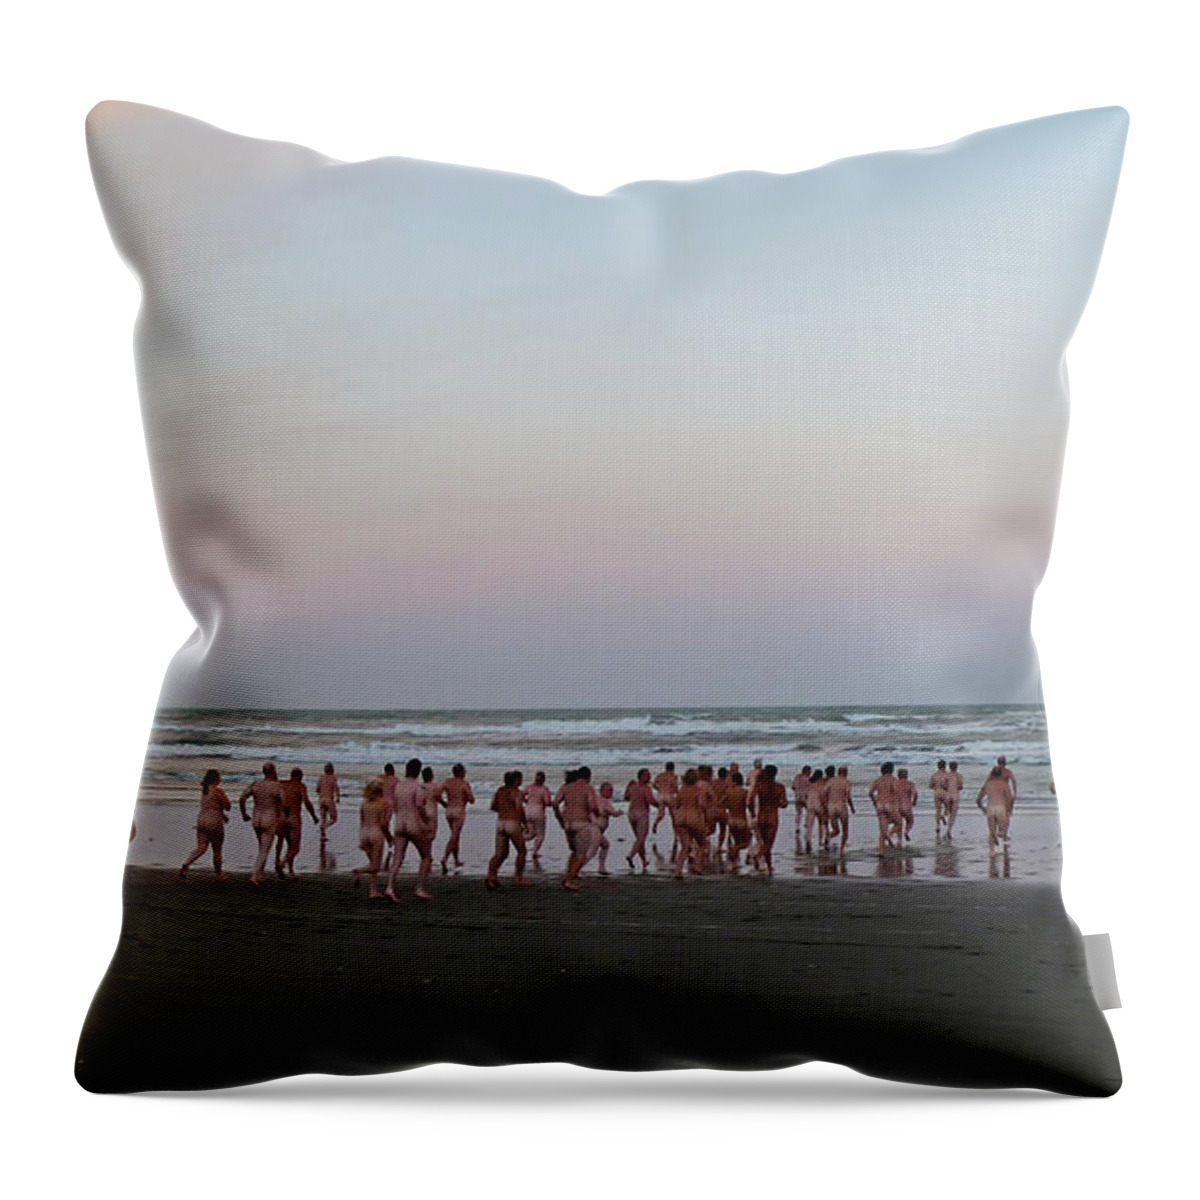 Skinny Dipping Down A Moon Beam Throw Pillow featuring the photograph Skinny Dipping Down a Moon Beam by Steve Taylor